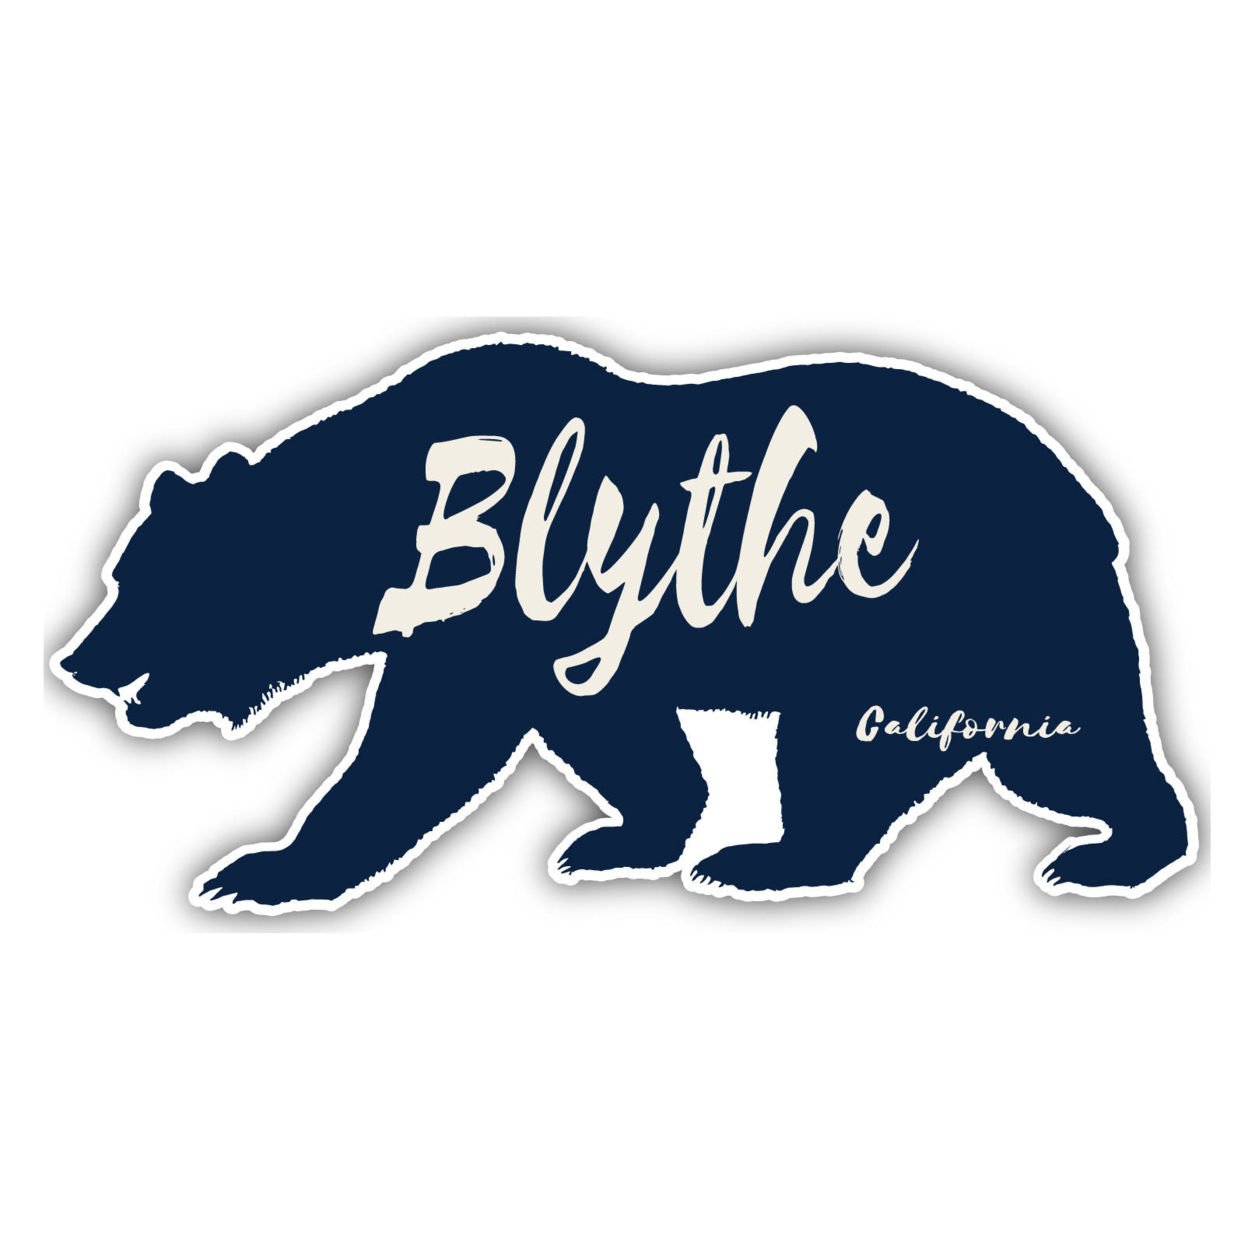 Blythe California Souvenir Decorative Stickers (Choose Theme And Size) - 4-Pack, 8-Inch, Great Outdoors